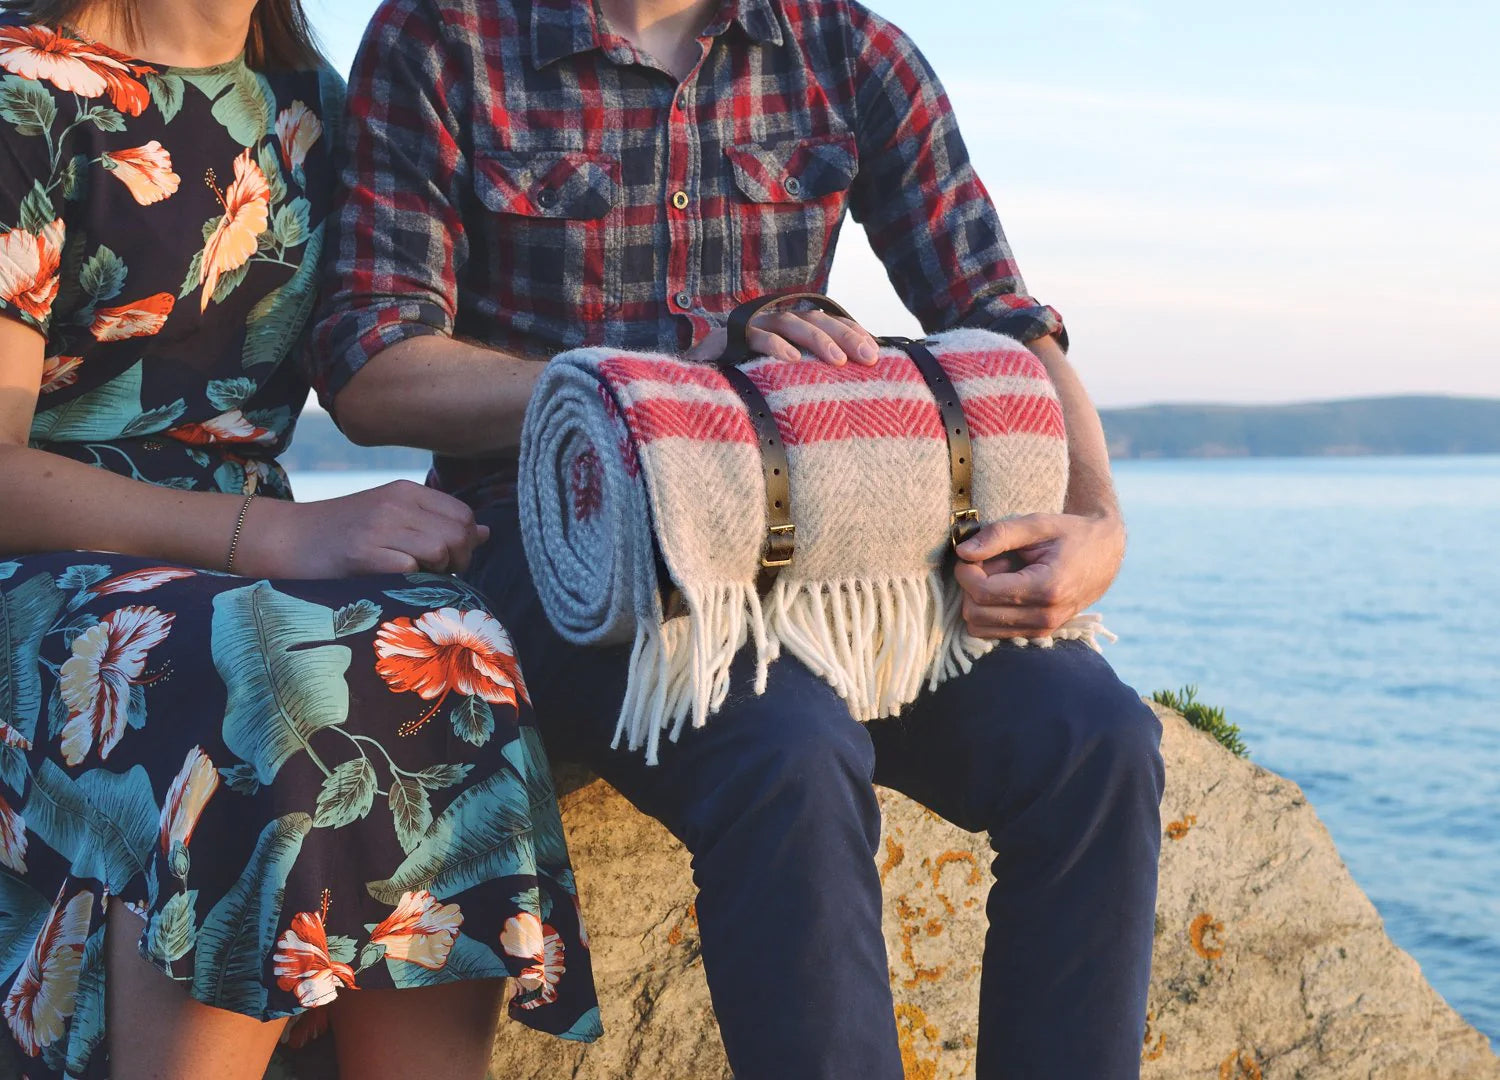 Wool gifts to celebrate your 7th wedding anniversary